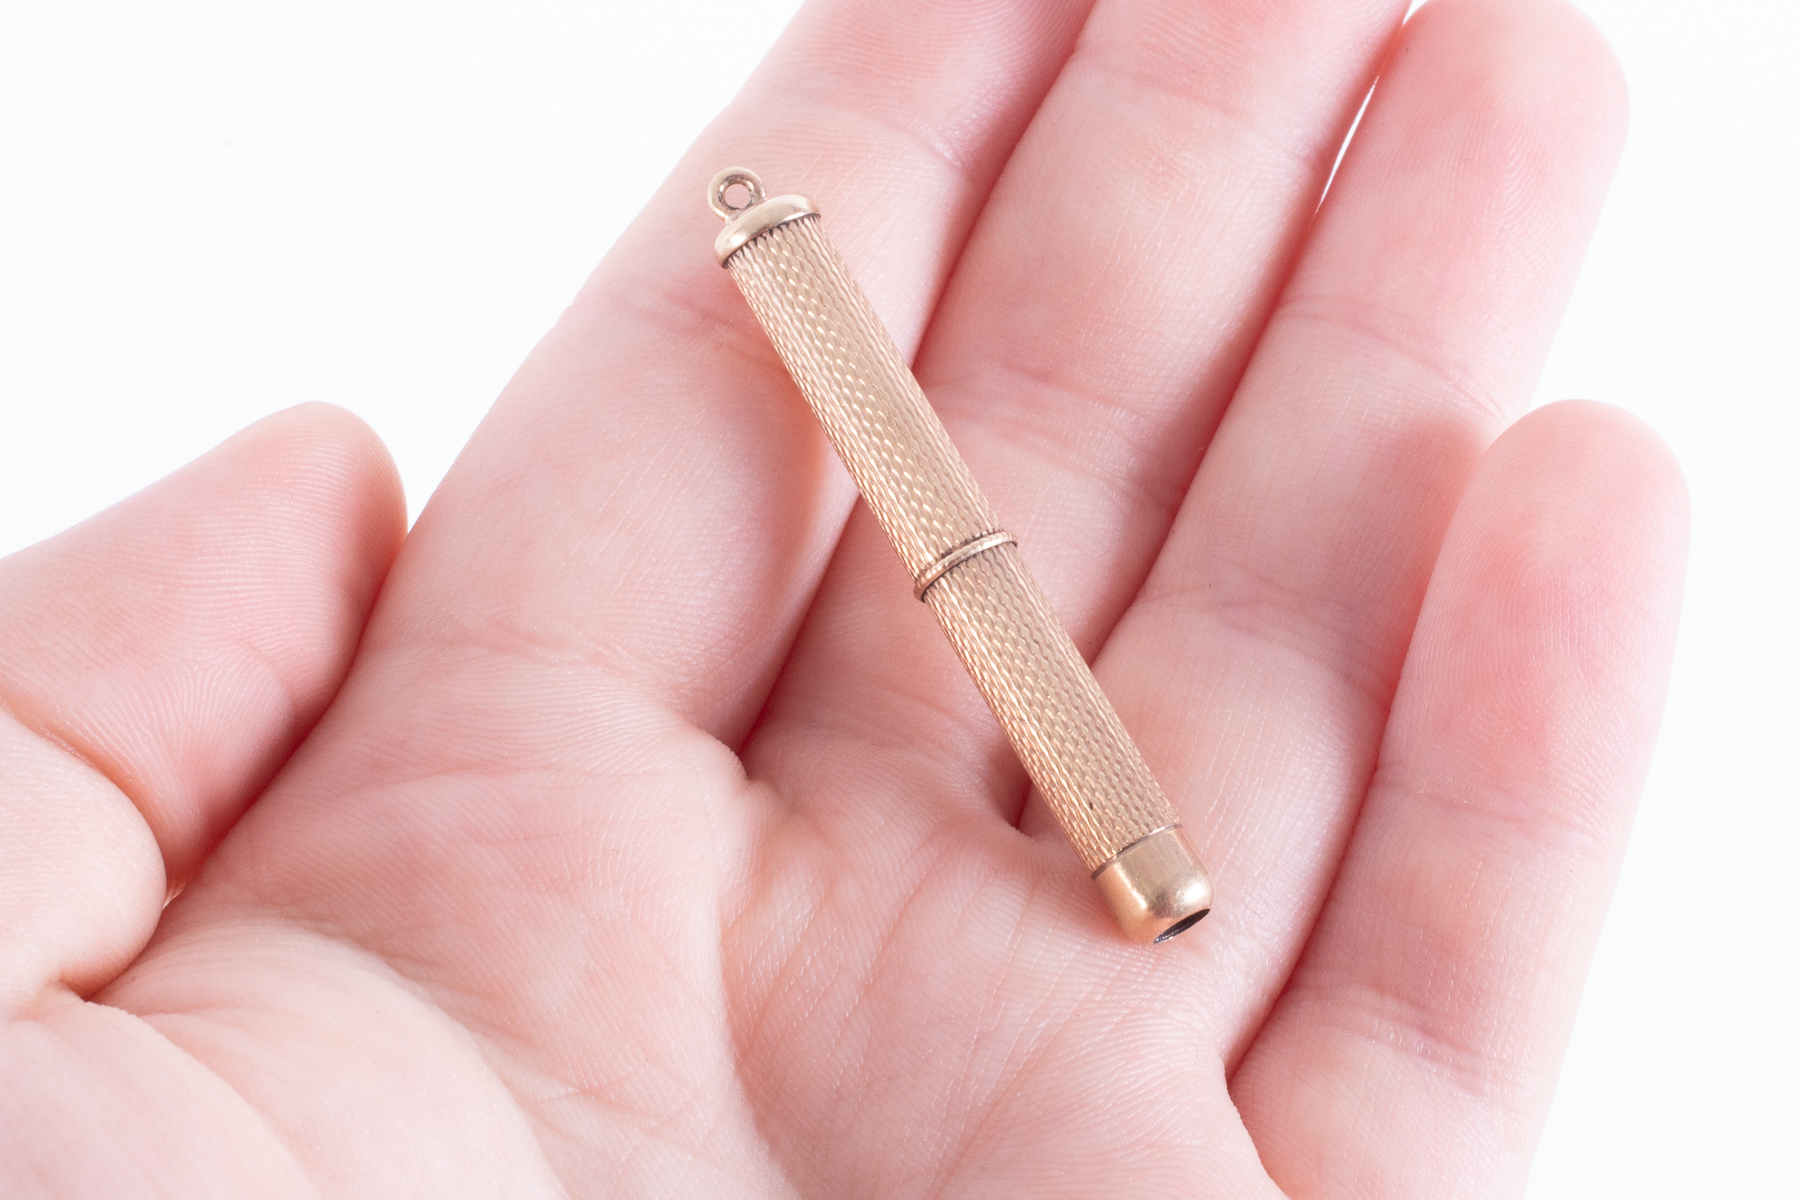 A 9ct yellow gold toothpick with an engineered finish, length 4.5cm (with pick retracted), 5.49gm. - Image 3 of 3